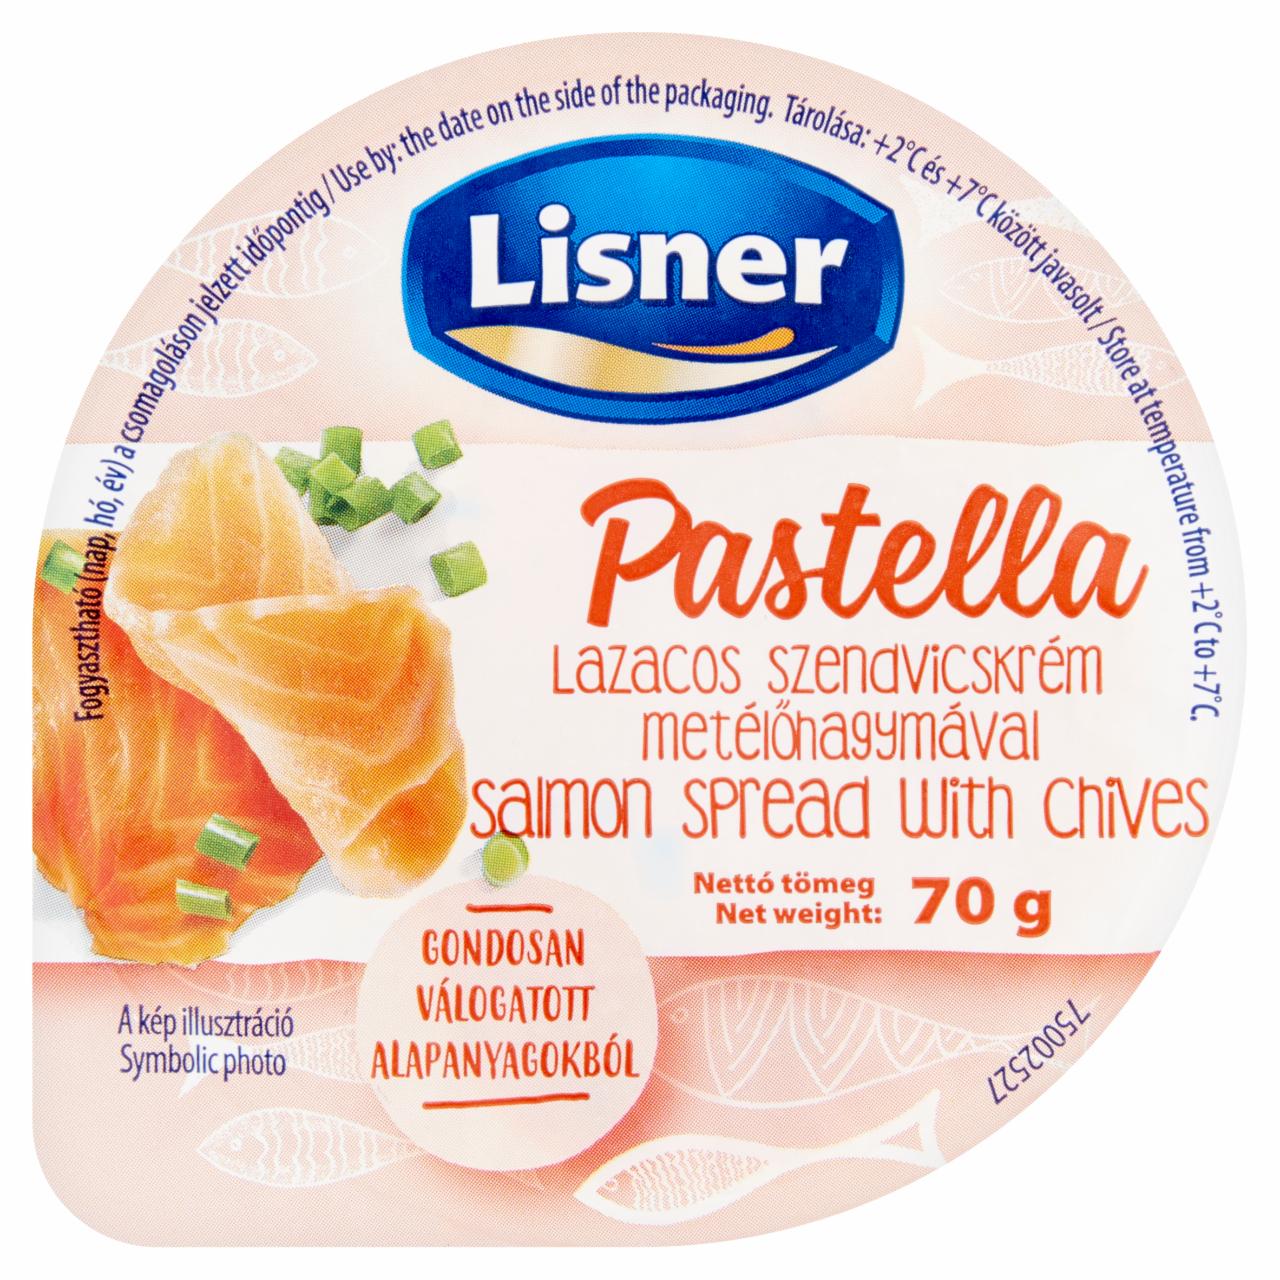 Photo - Lisner Pastella Salmon Spread with Chives 70 g